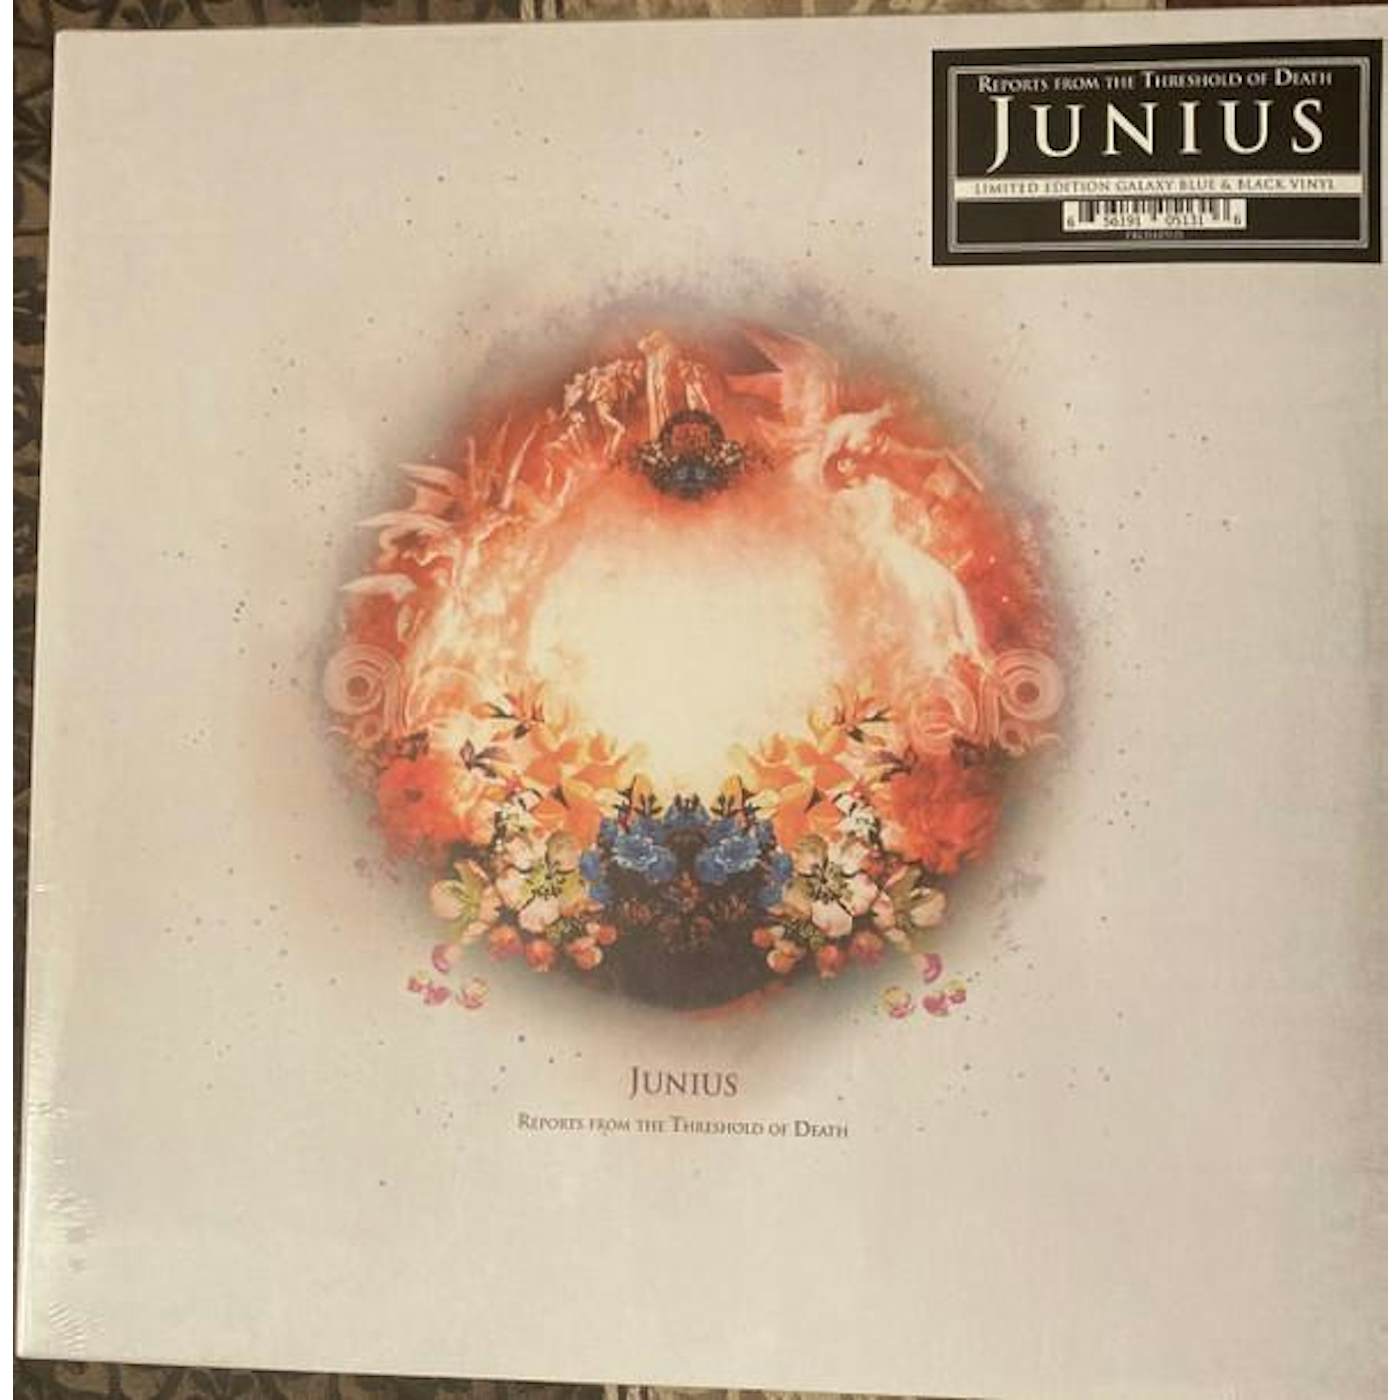 Junius Reports from the Threshold of Death Vinyl Record